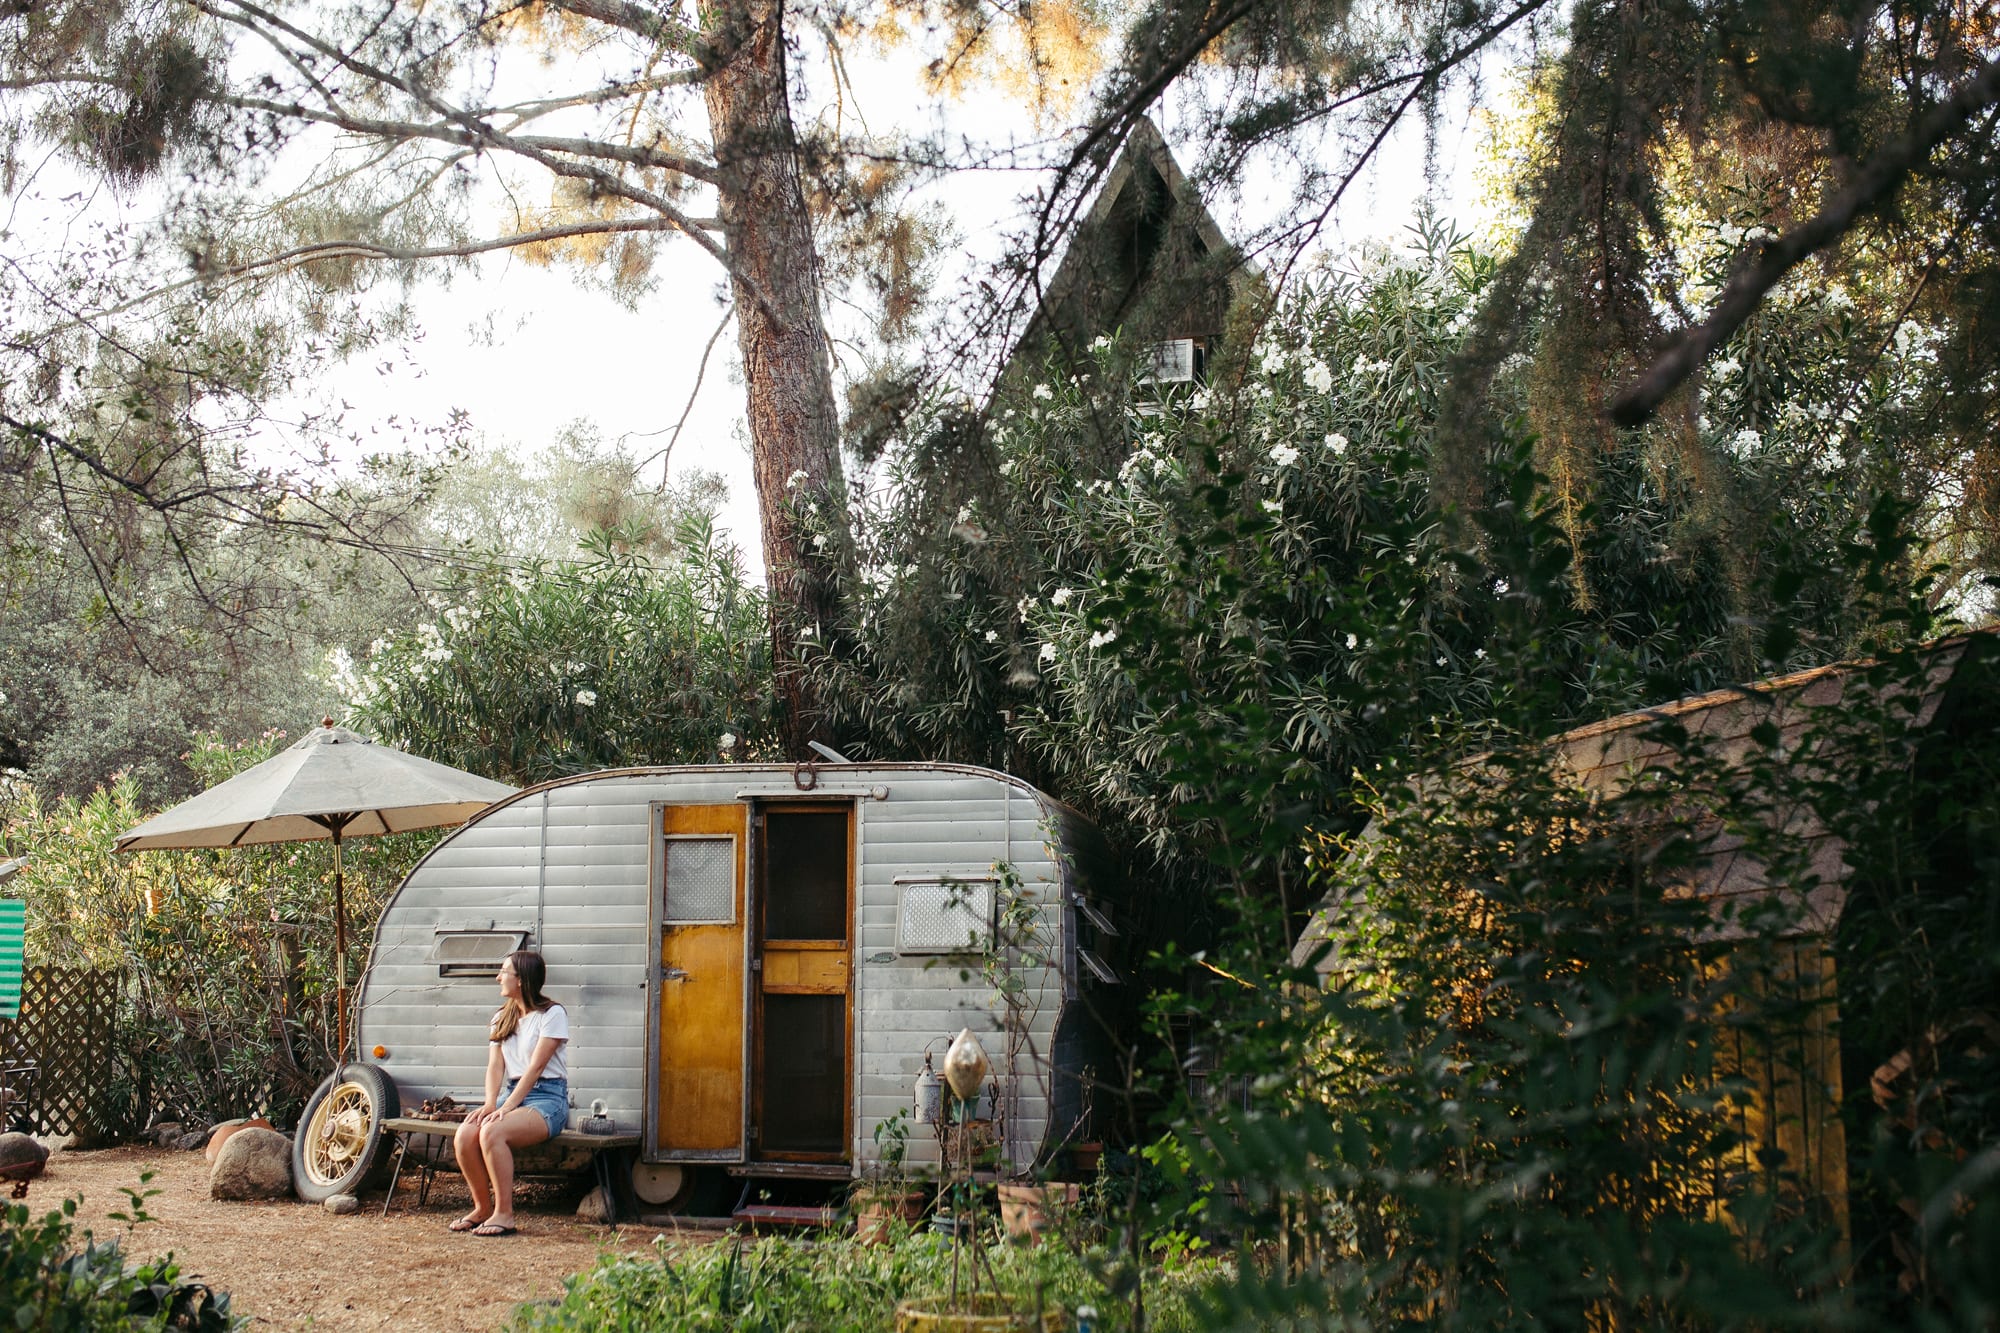 The trailer is nestled between an abundance of greenery and the A-Frame cabin.